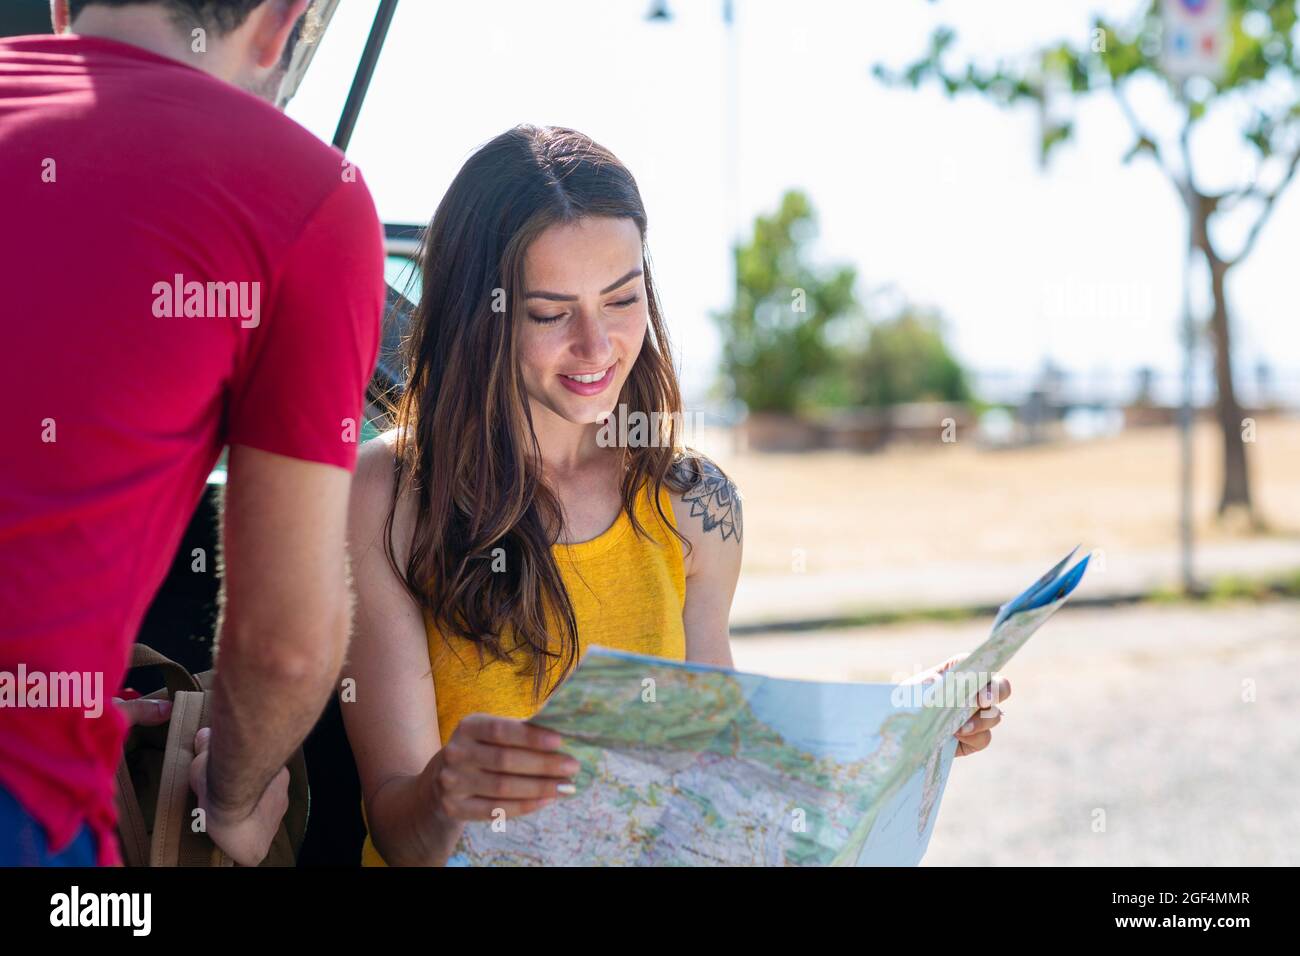 Smiling woman holding map while sitting by man in car trunk Stock Photo